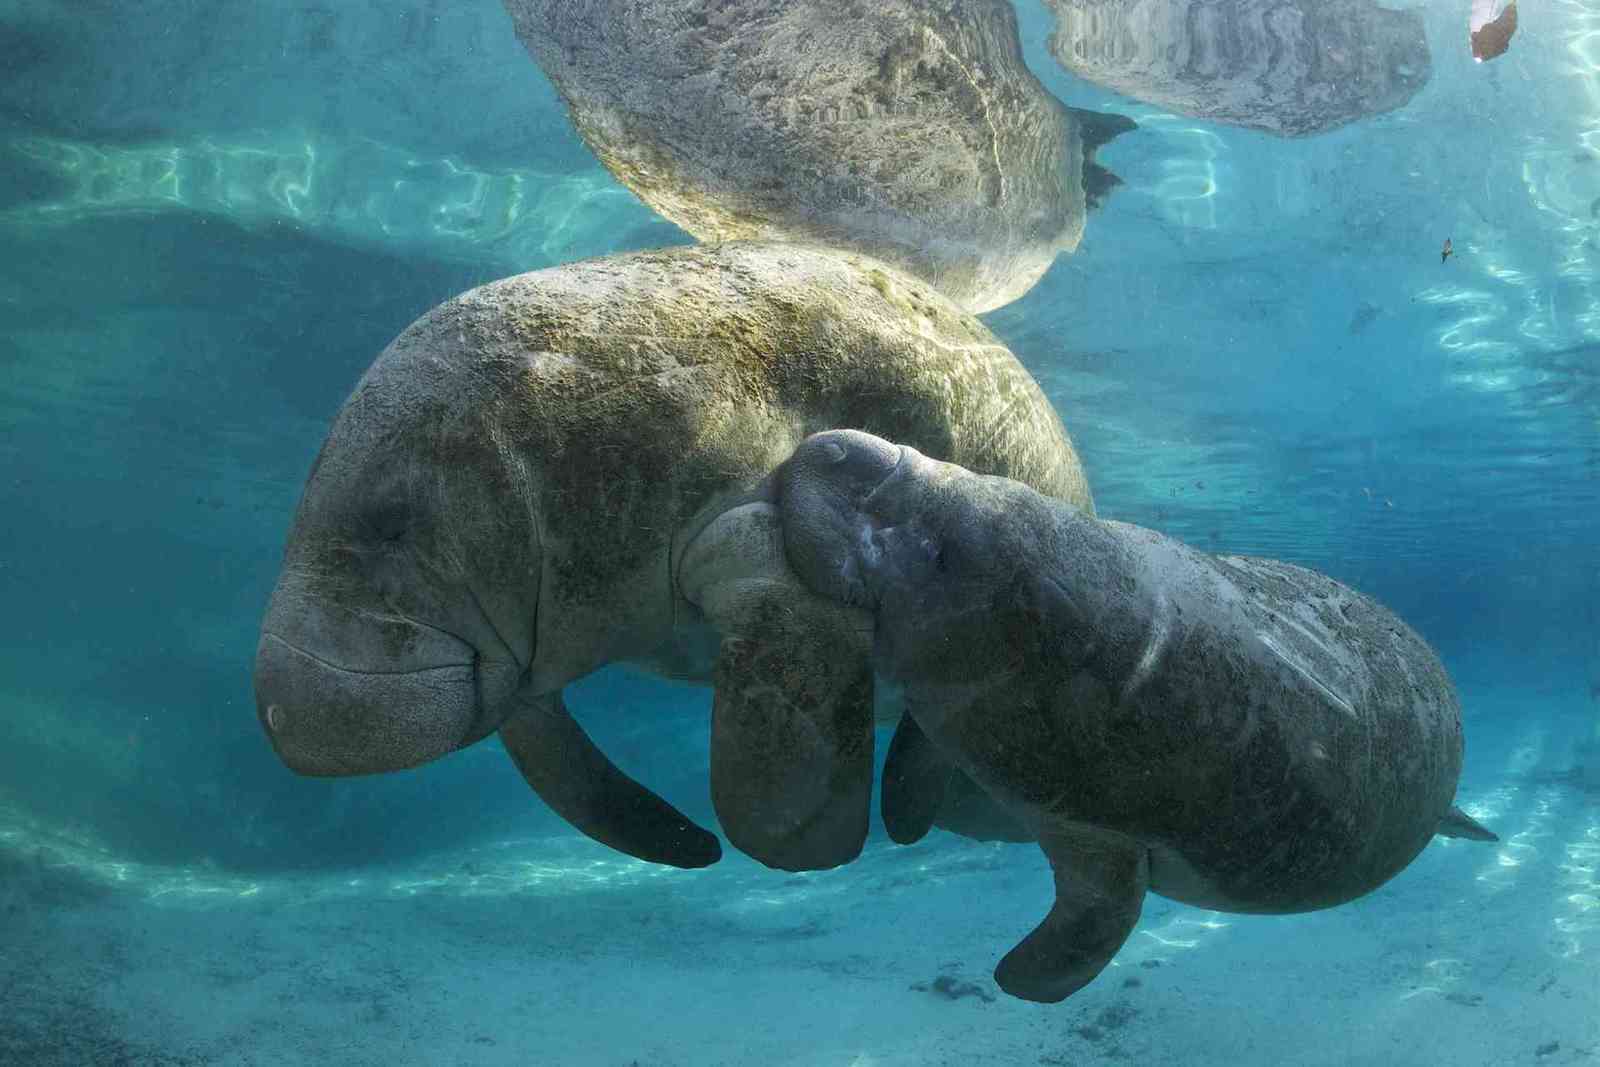 Are Manatees Related To Elephants